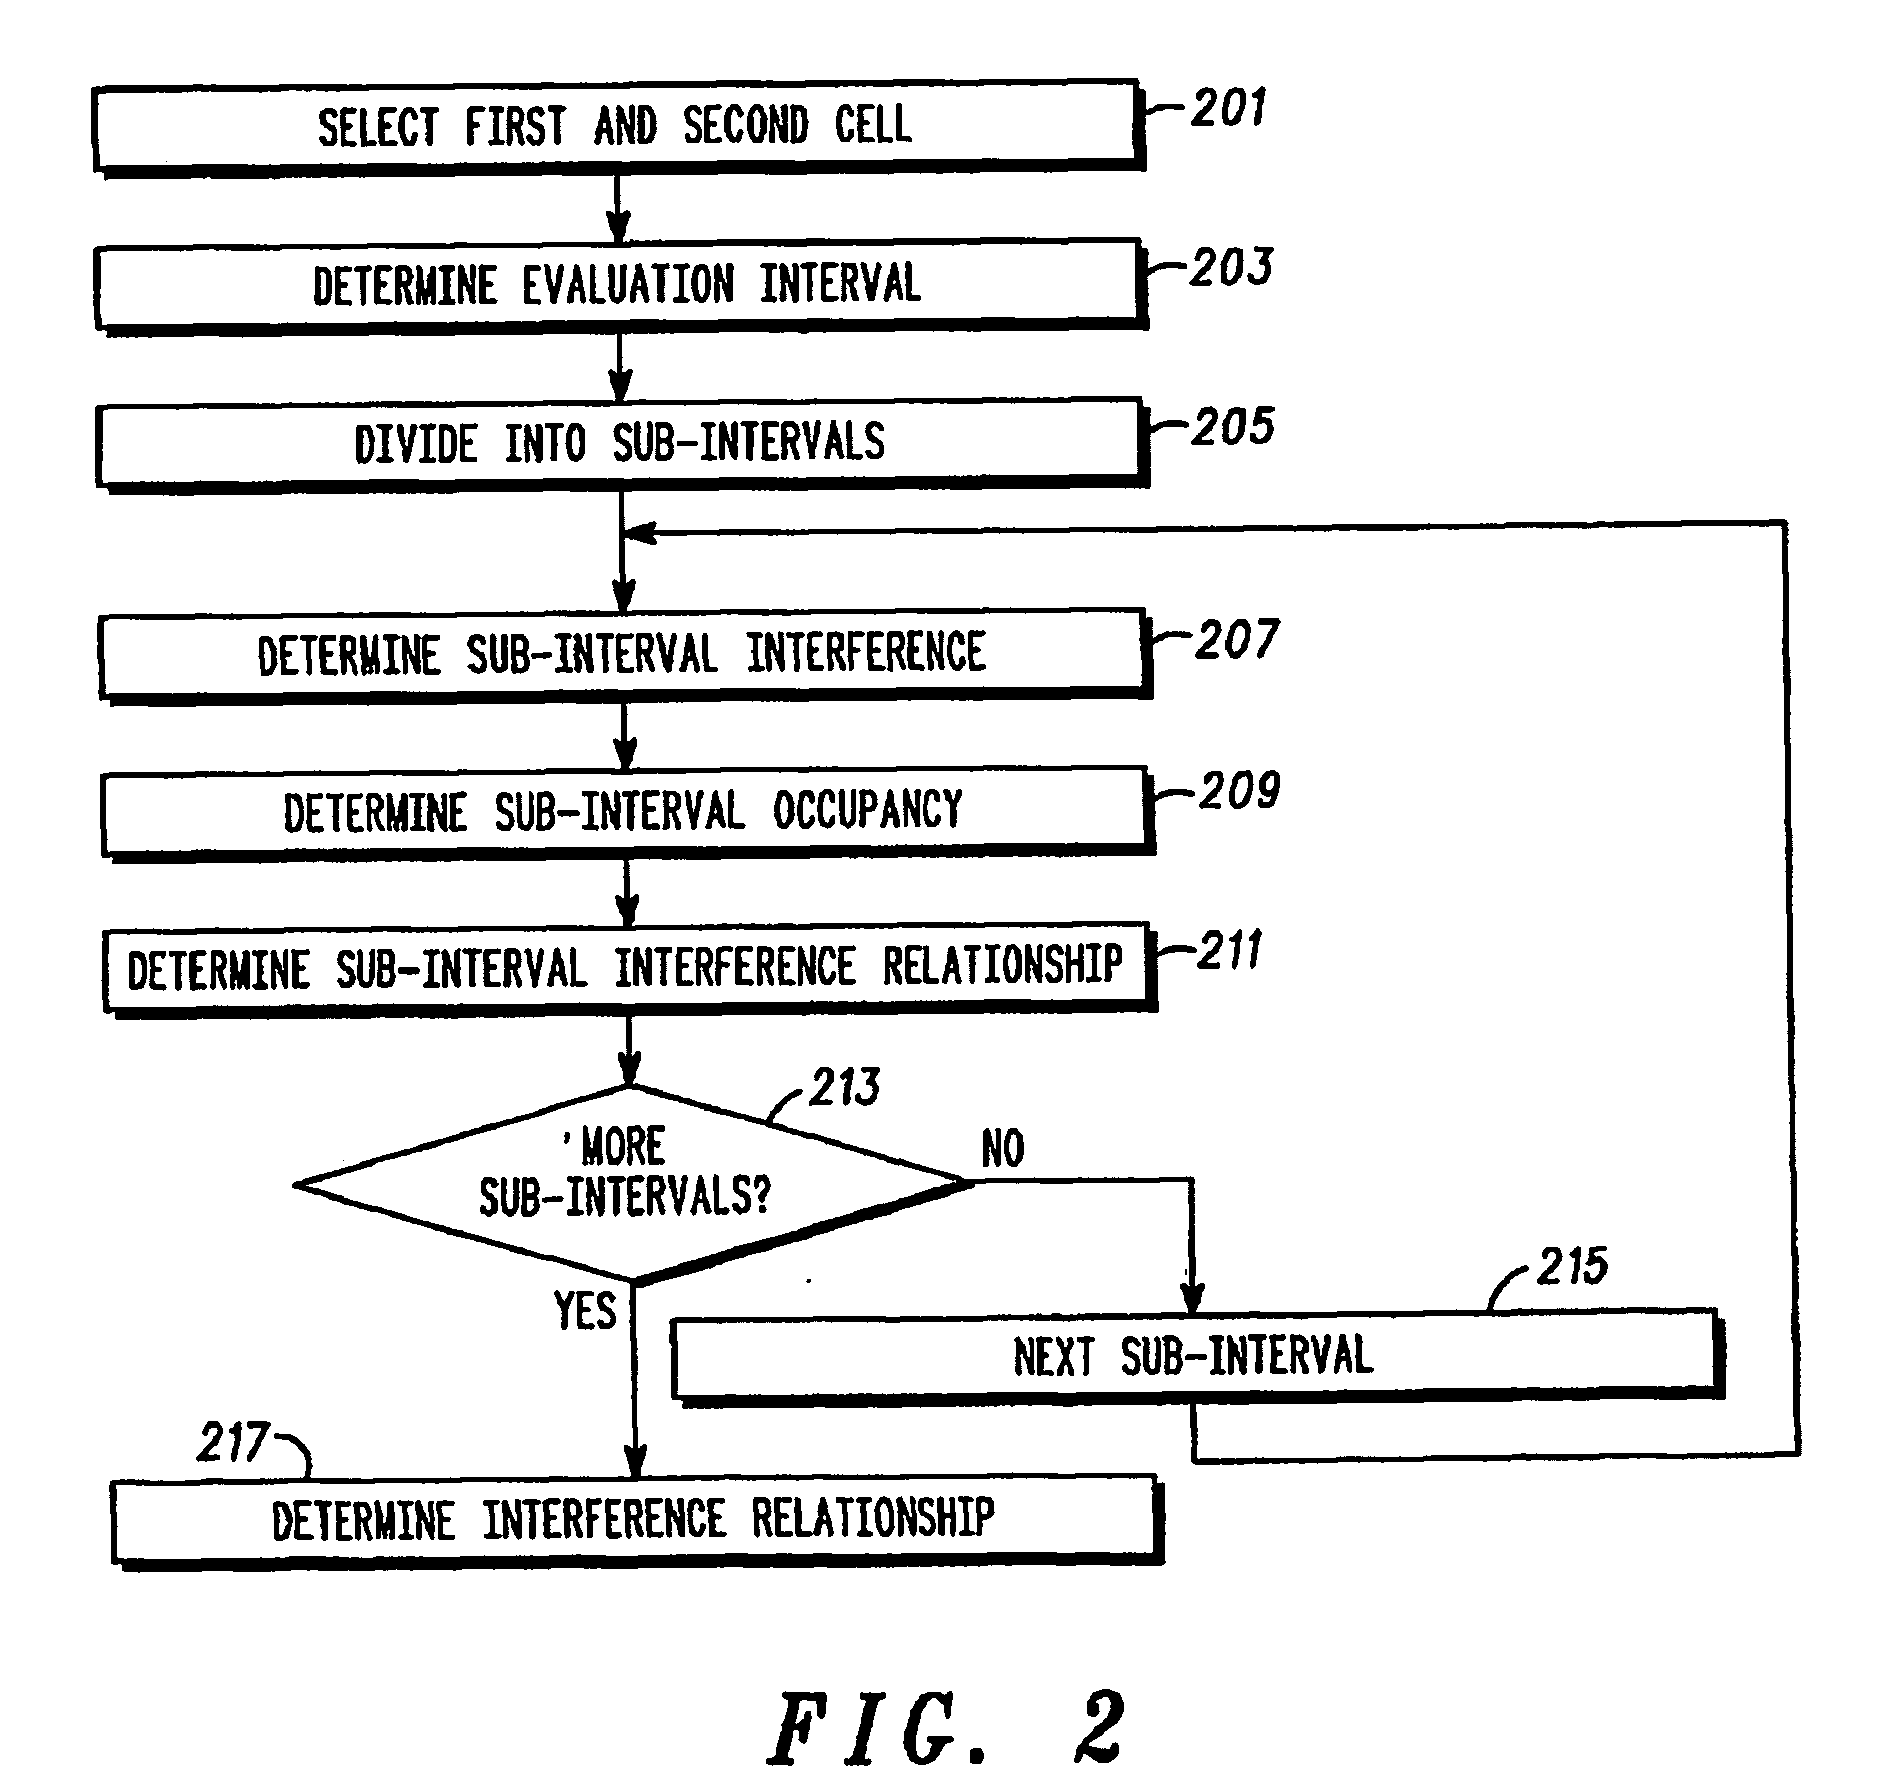 Method and apparatus for determining an interference relationship between cells of a cellular communication system